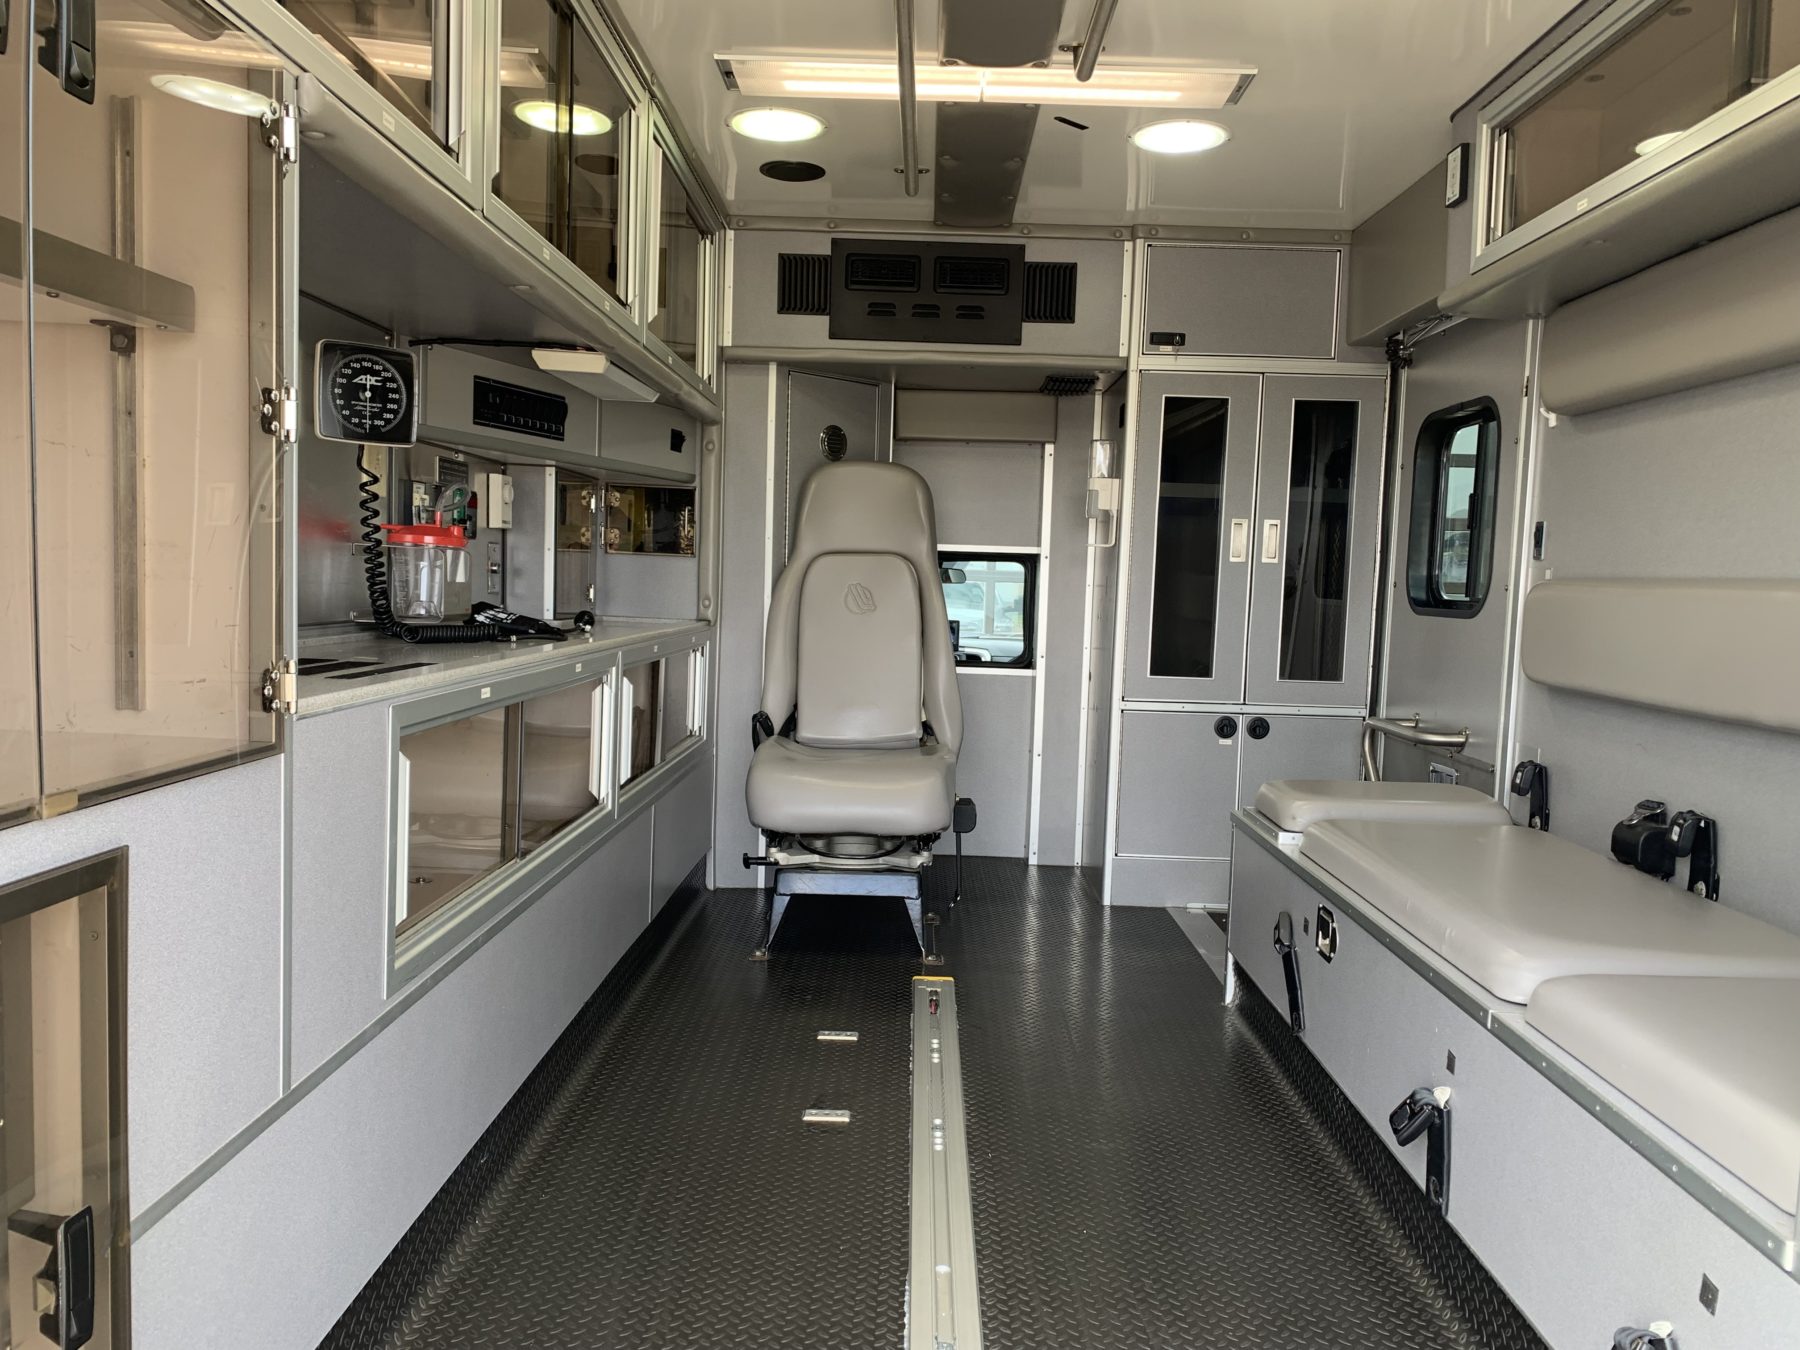 2014 Ram 4500 4x4 Heavy Duty Ambulance For Sale – Picture 4